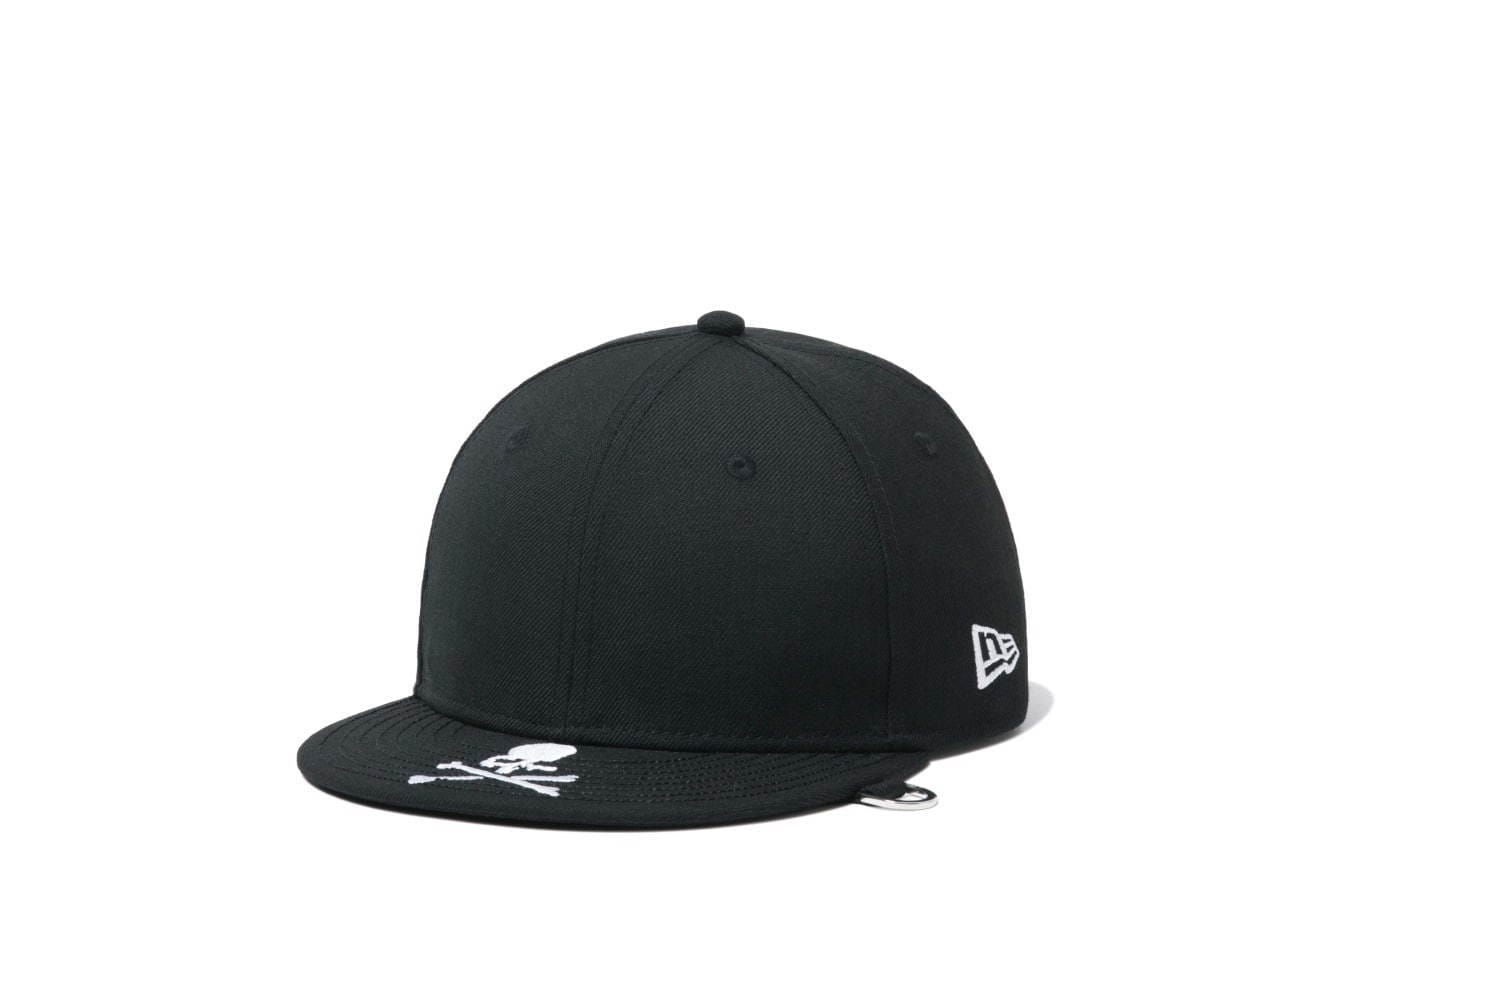 mastermind JAPAN x New Era Capsule Collection | HYPEBEAST